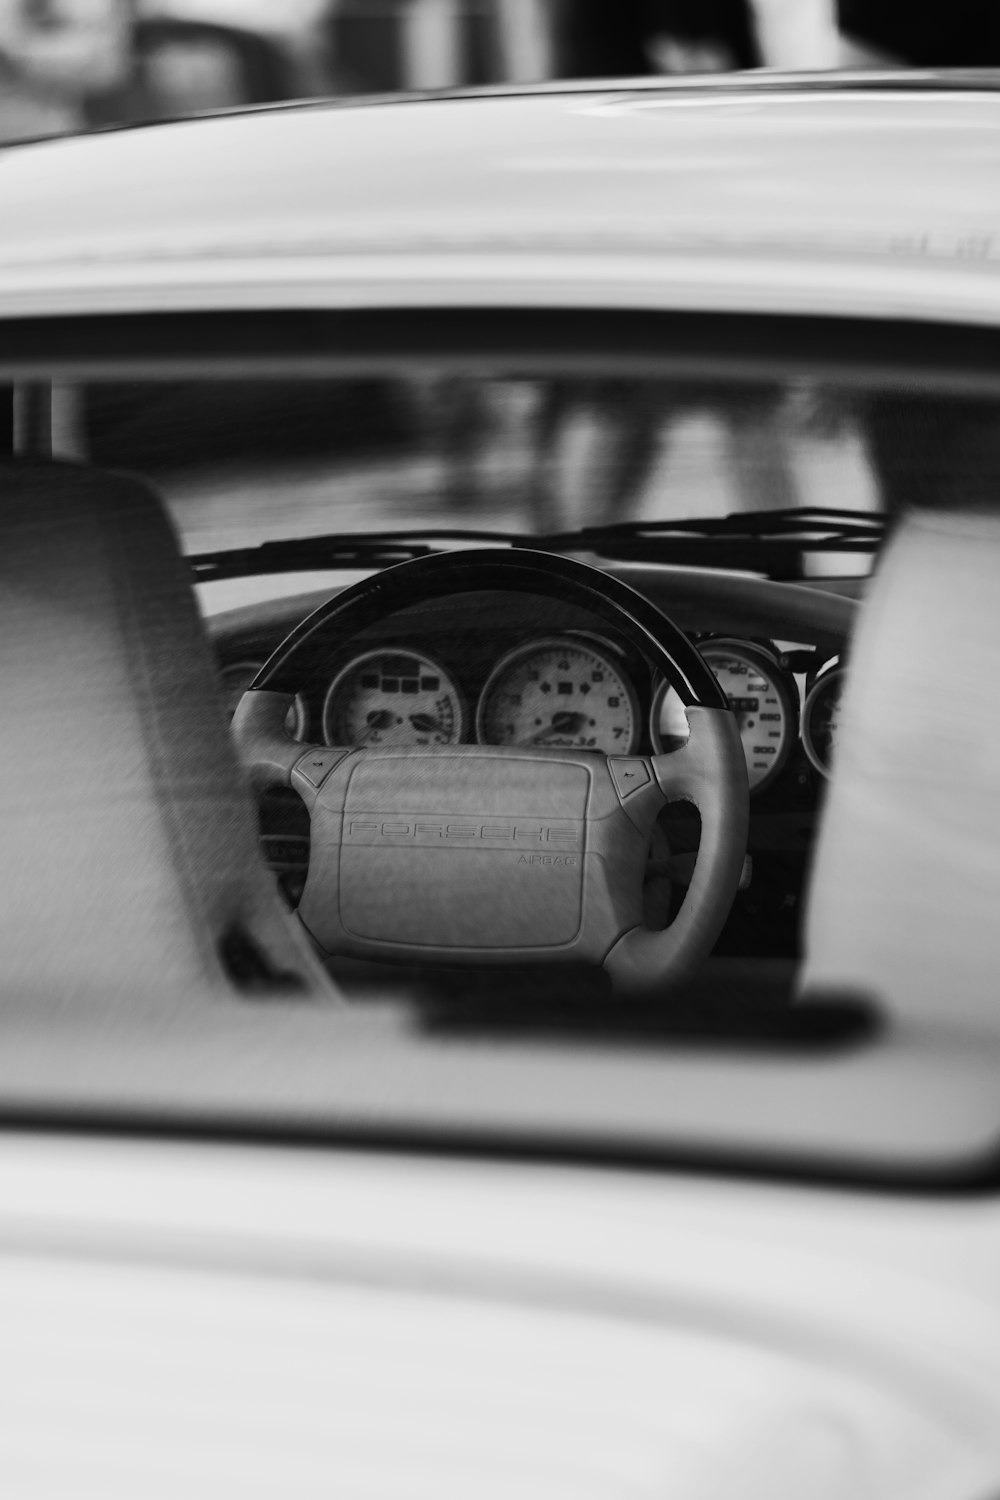 a view of a car's dashboard from inside the vehicle